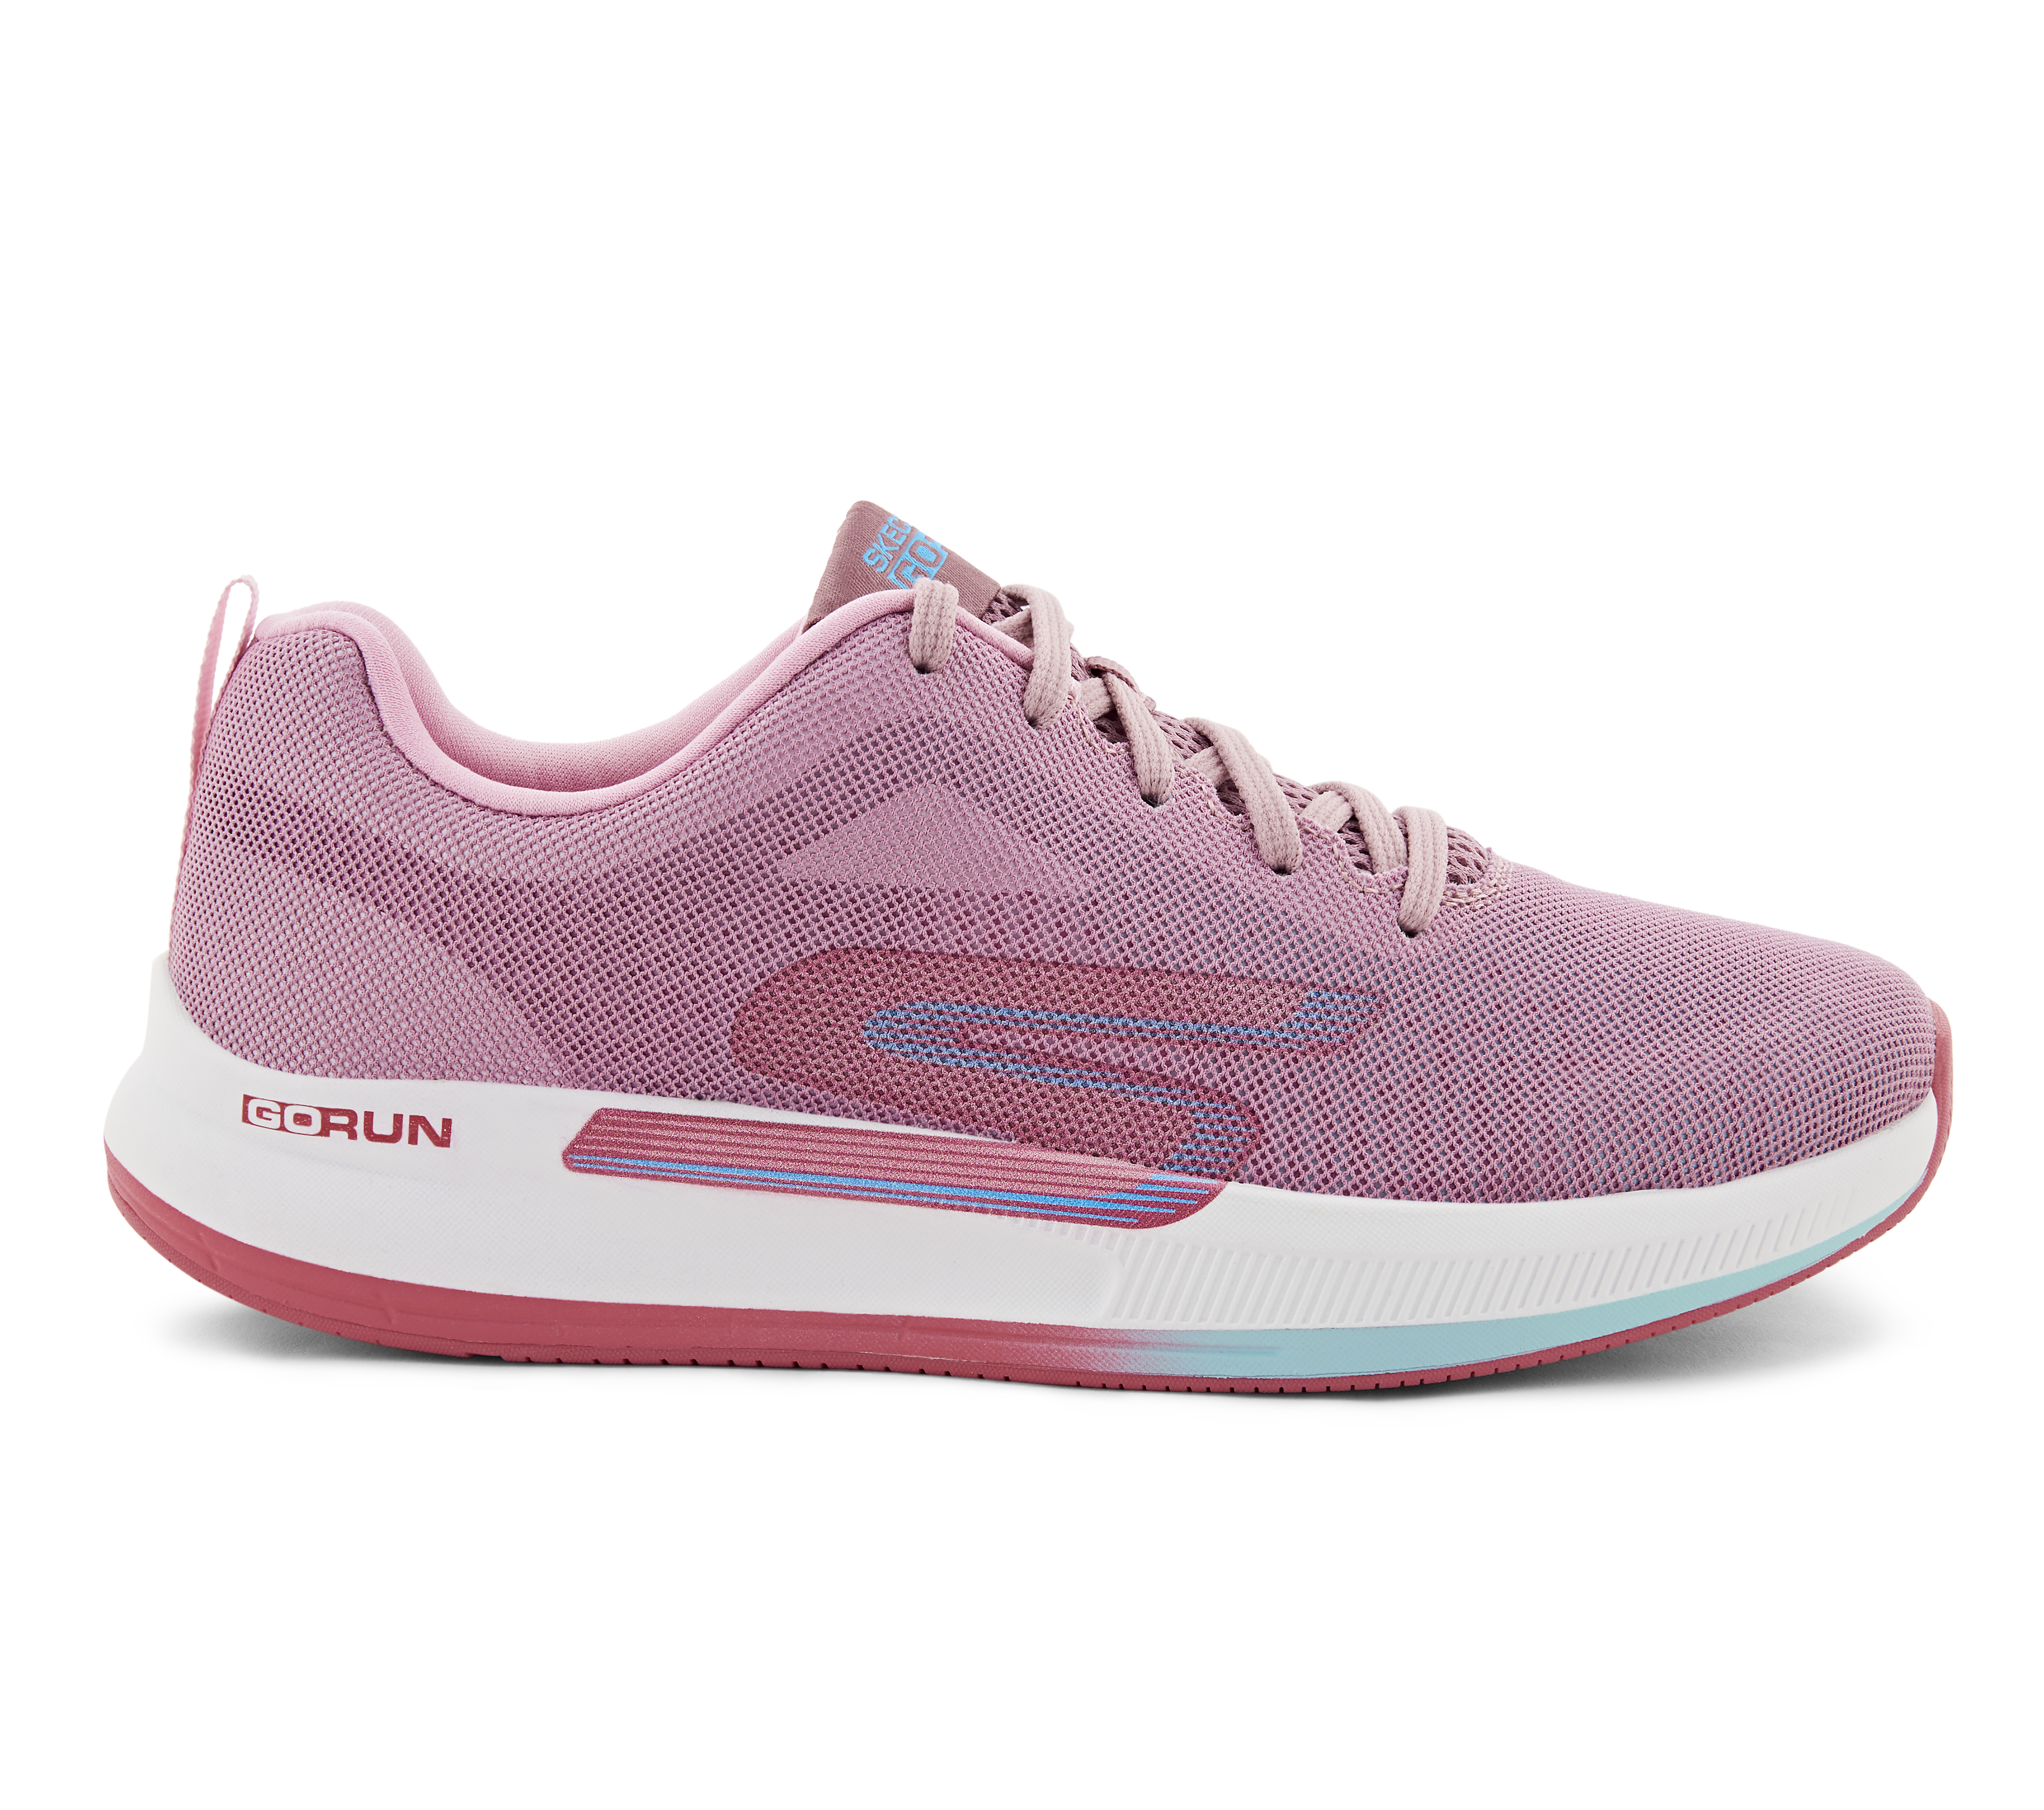 GO RUN PULSE-GET MOVING, MAUVE/MULTI Footwear Right View